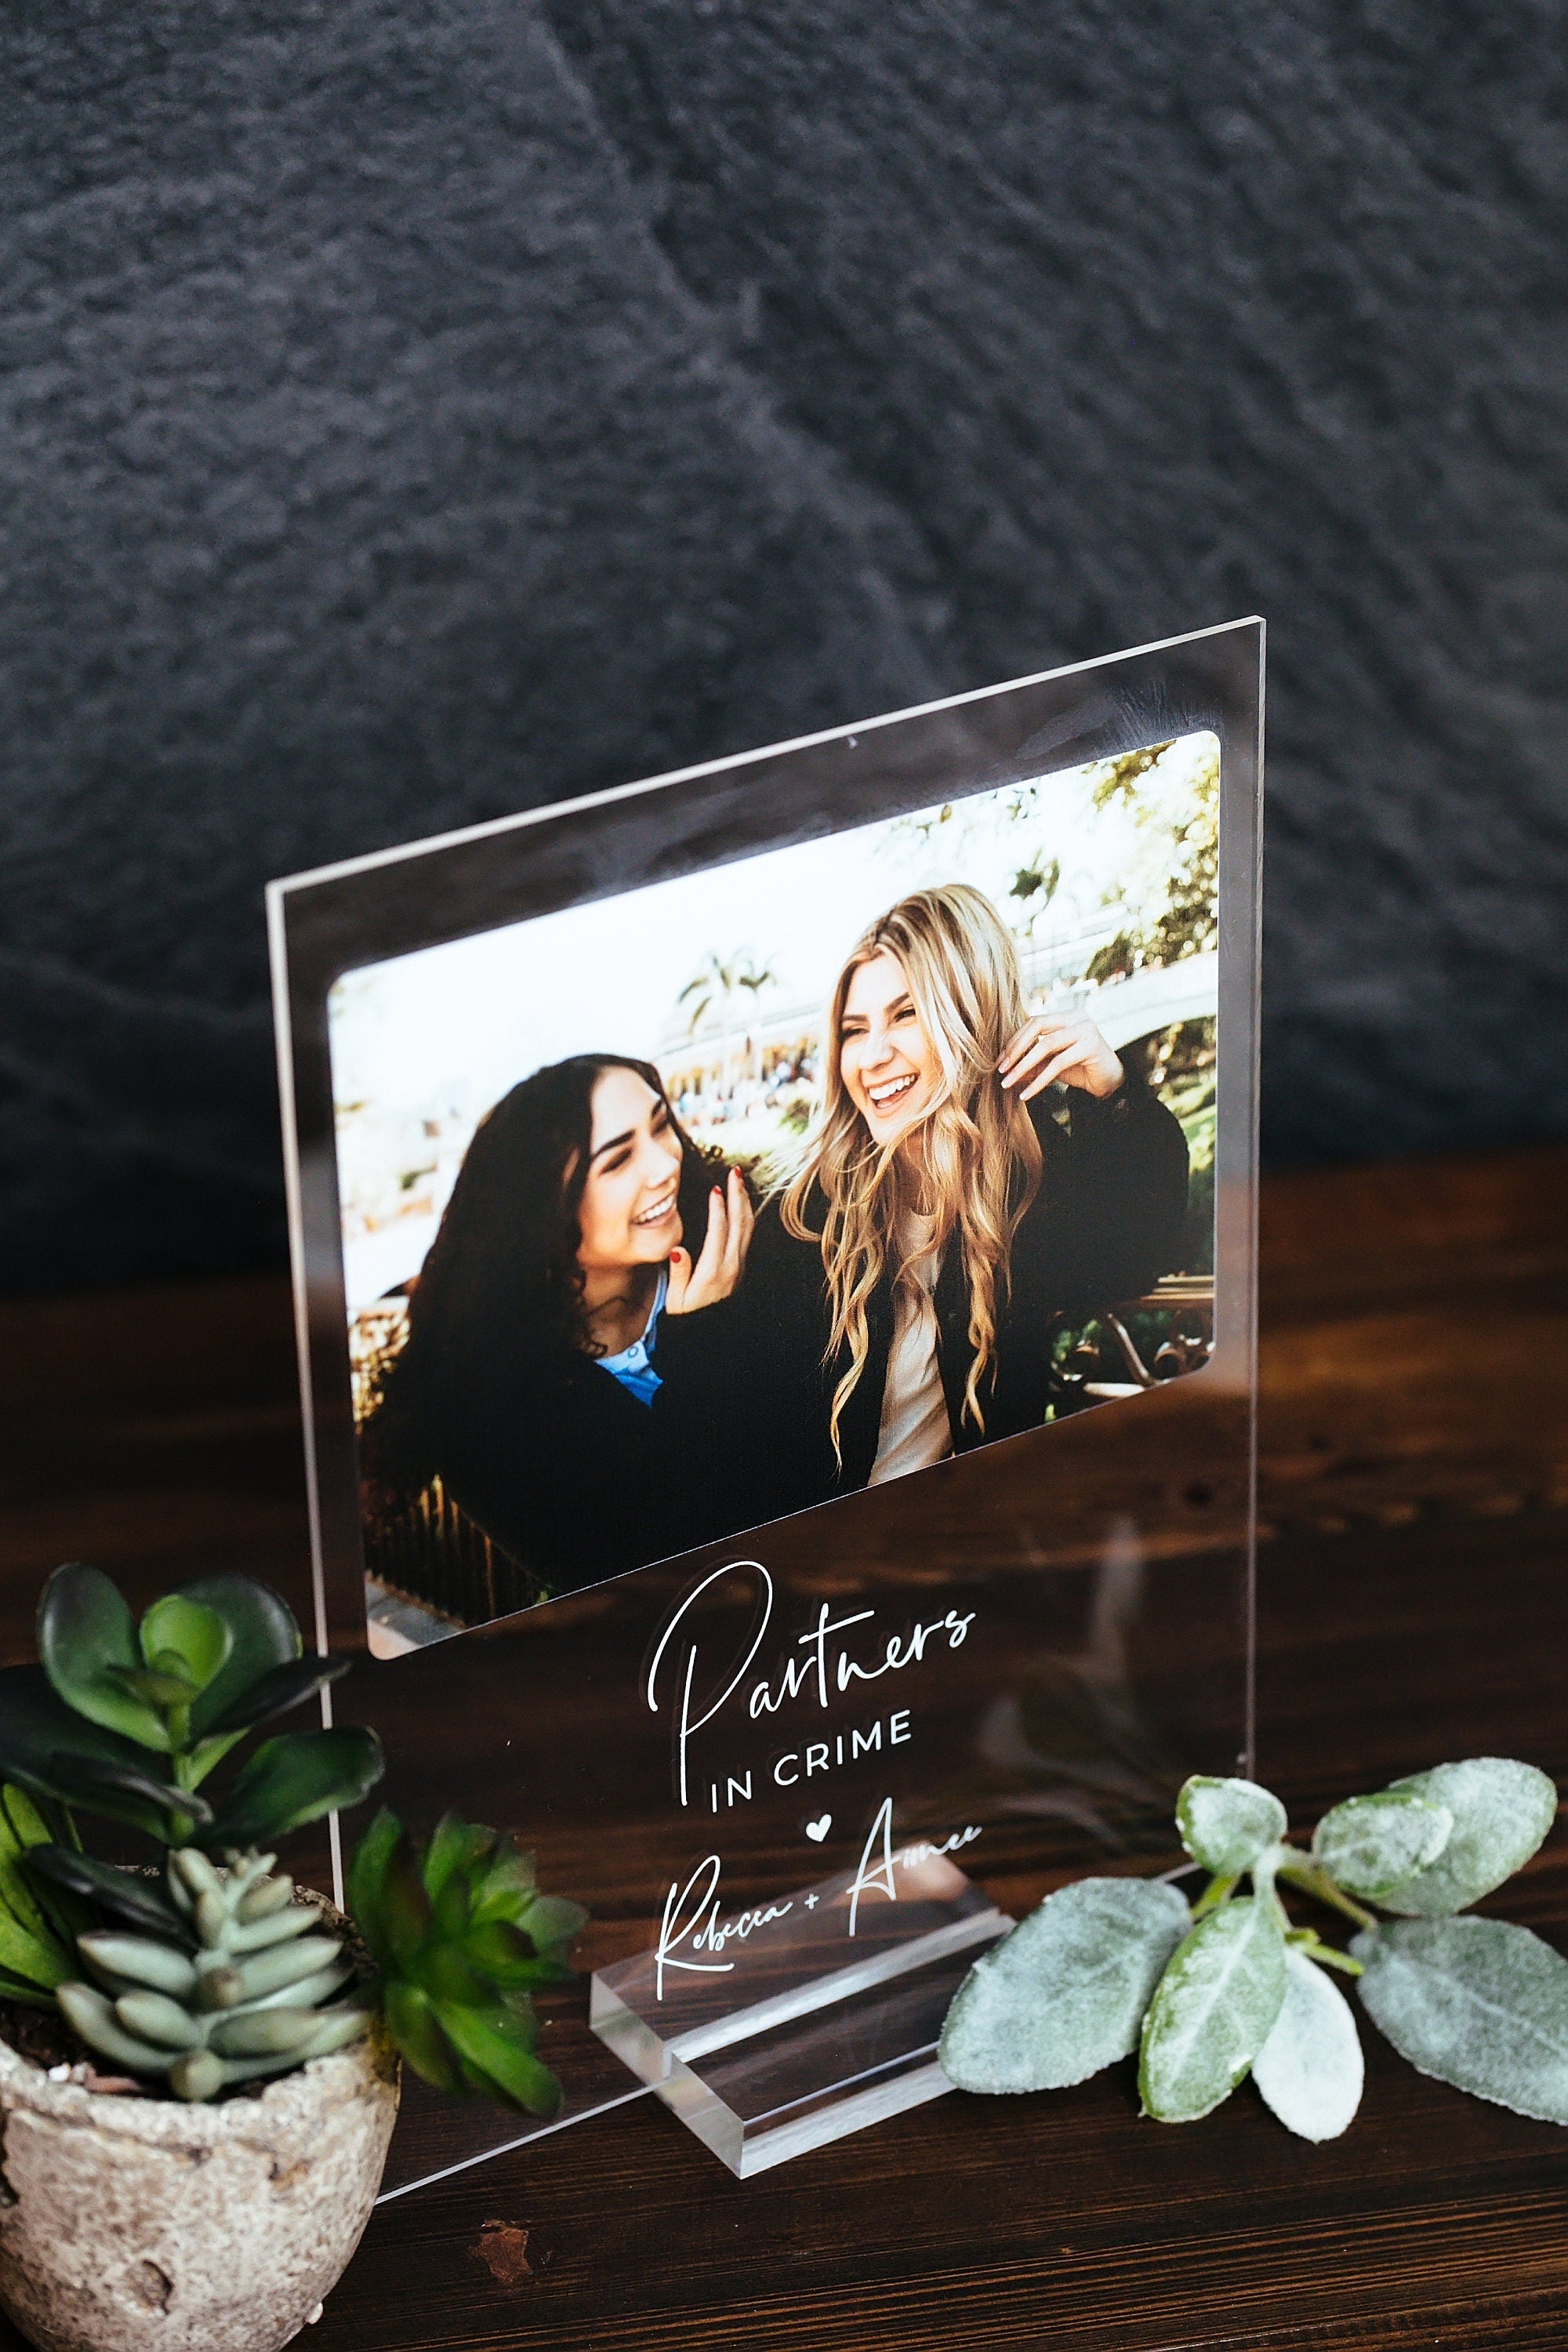 Personalized Photo Plaque w Stand, Best Friends Forever Gift, Gift for Her, Gift for Him, Photo Collage, Personalized Photo Memorial